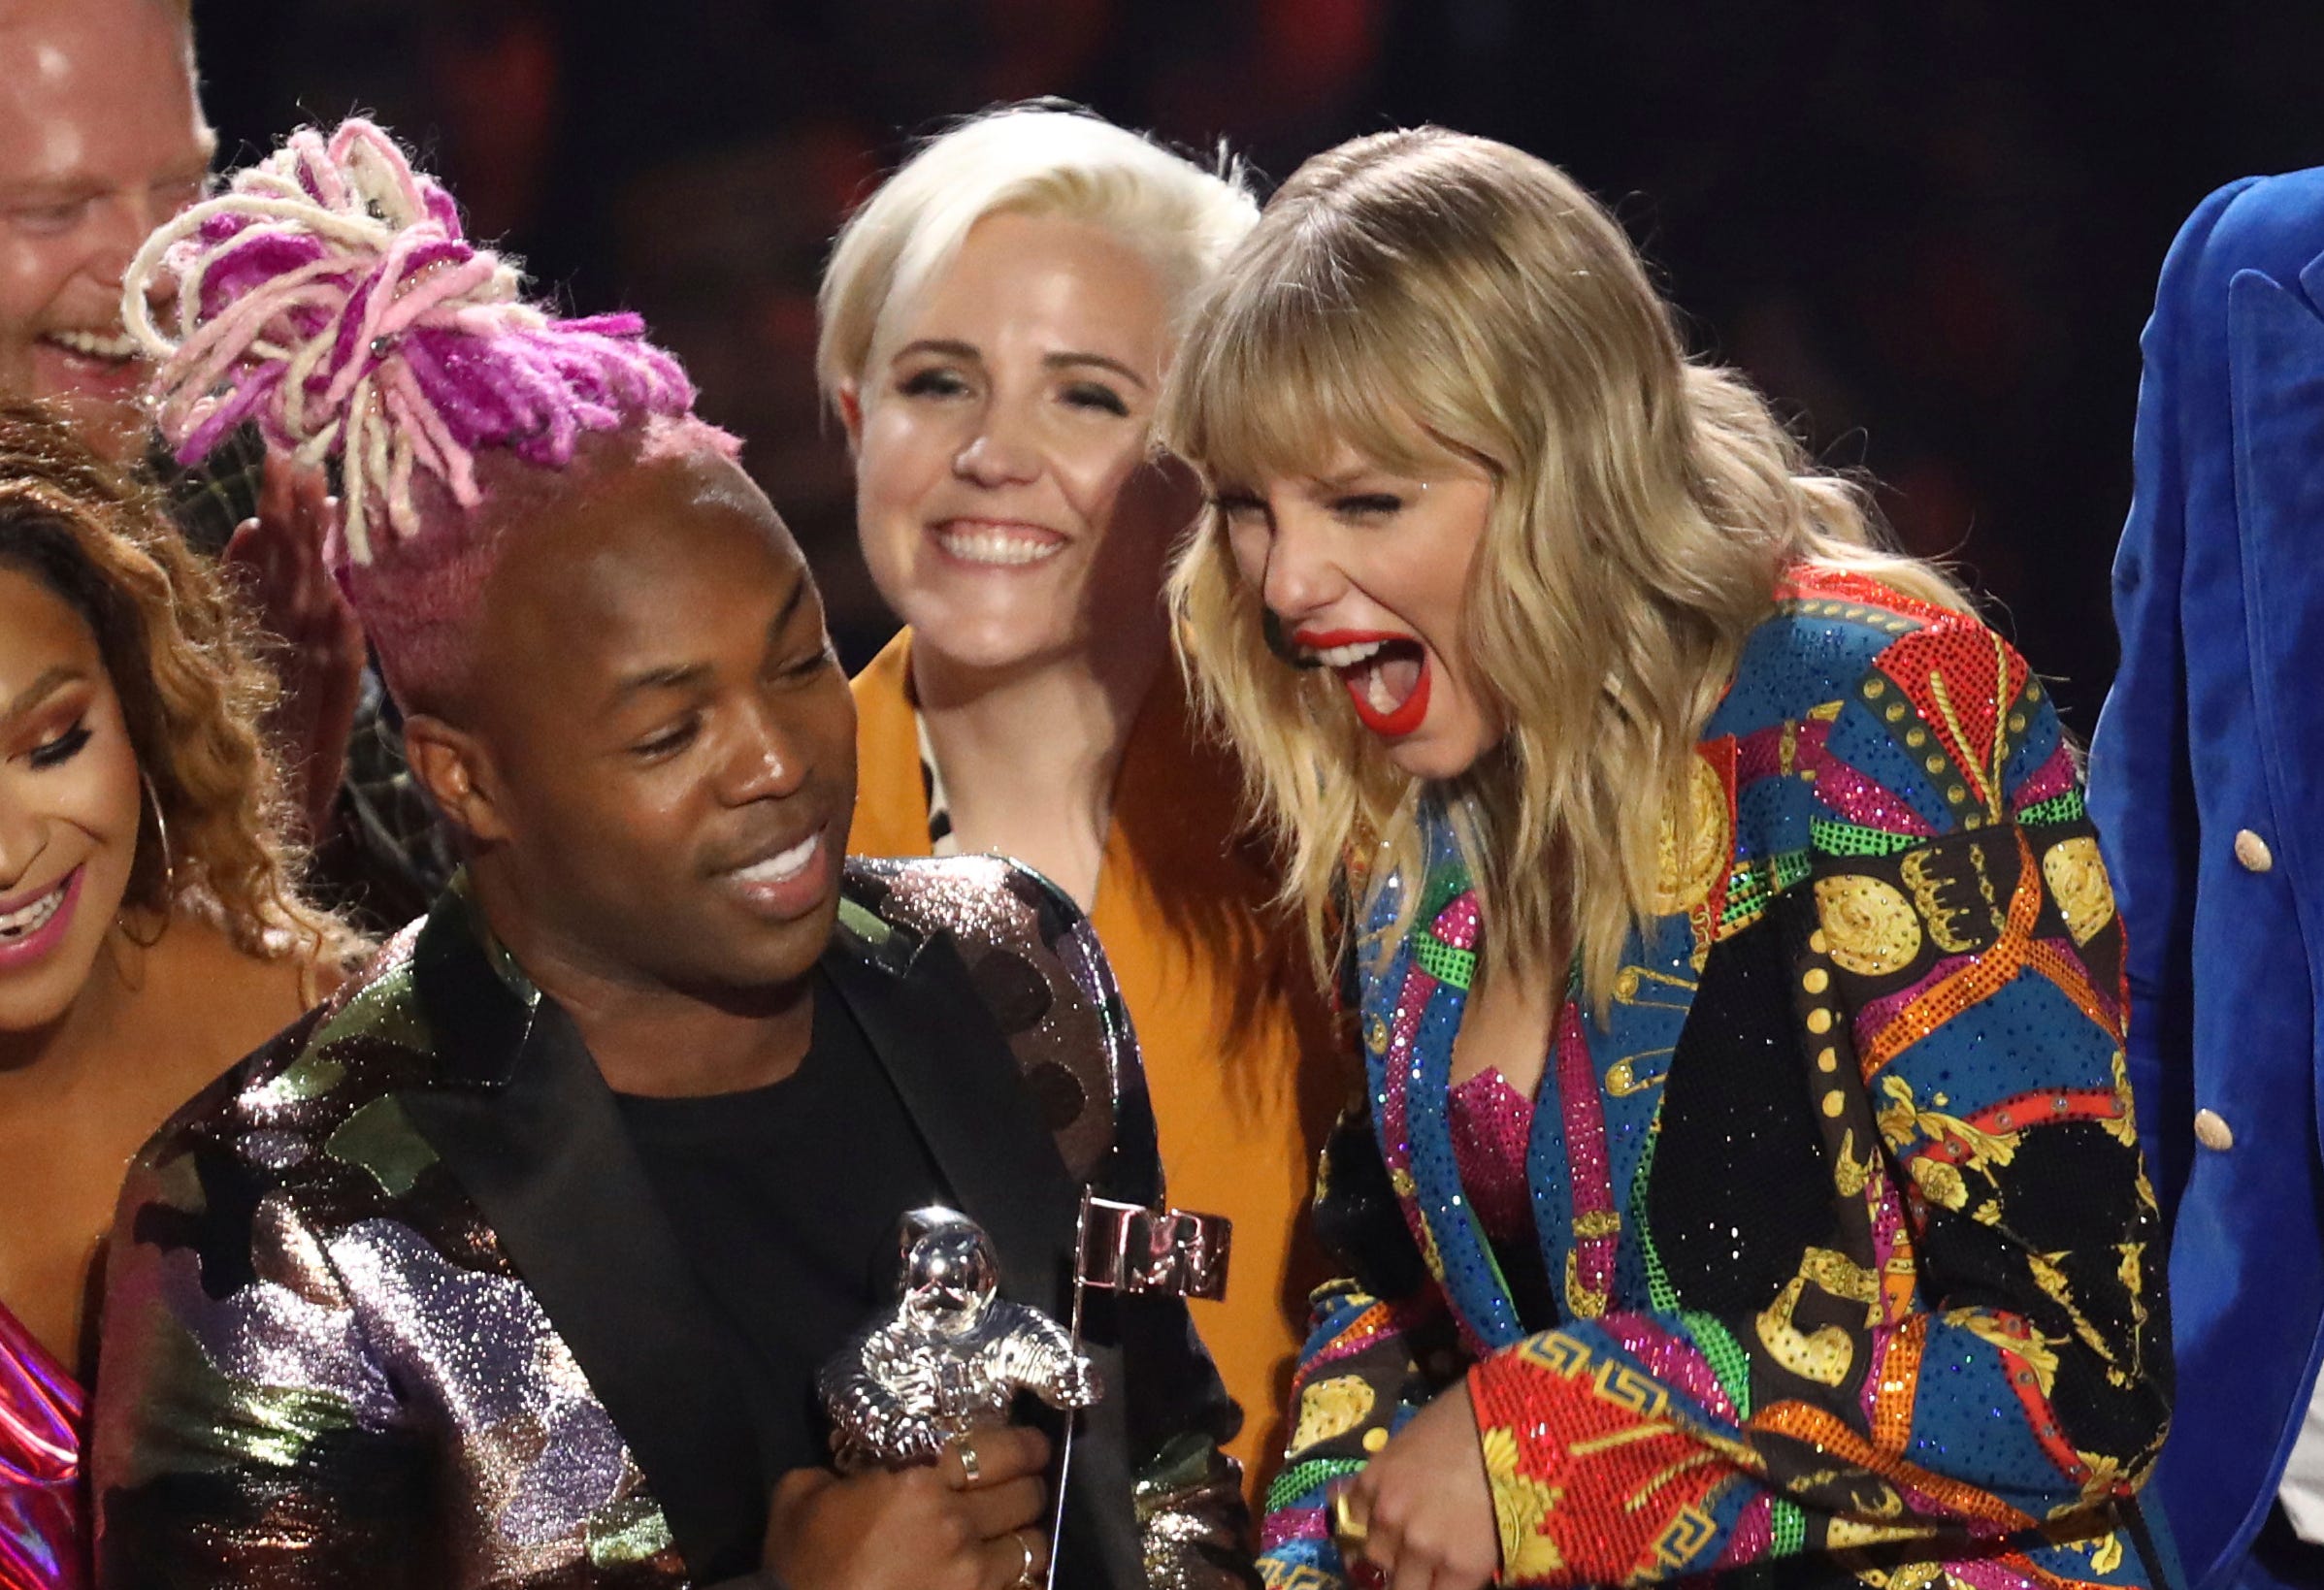 Vmas 2019 5 Moments You Missed From Taylor Swift To John